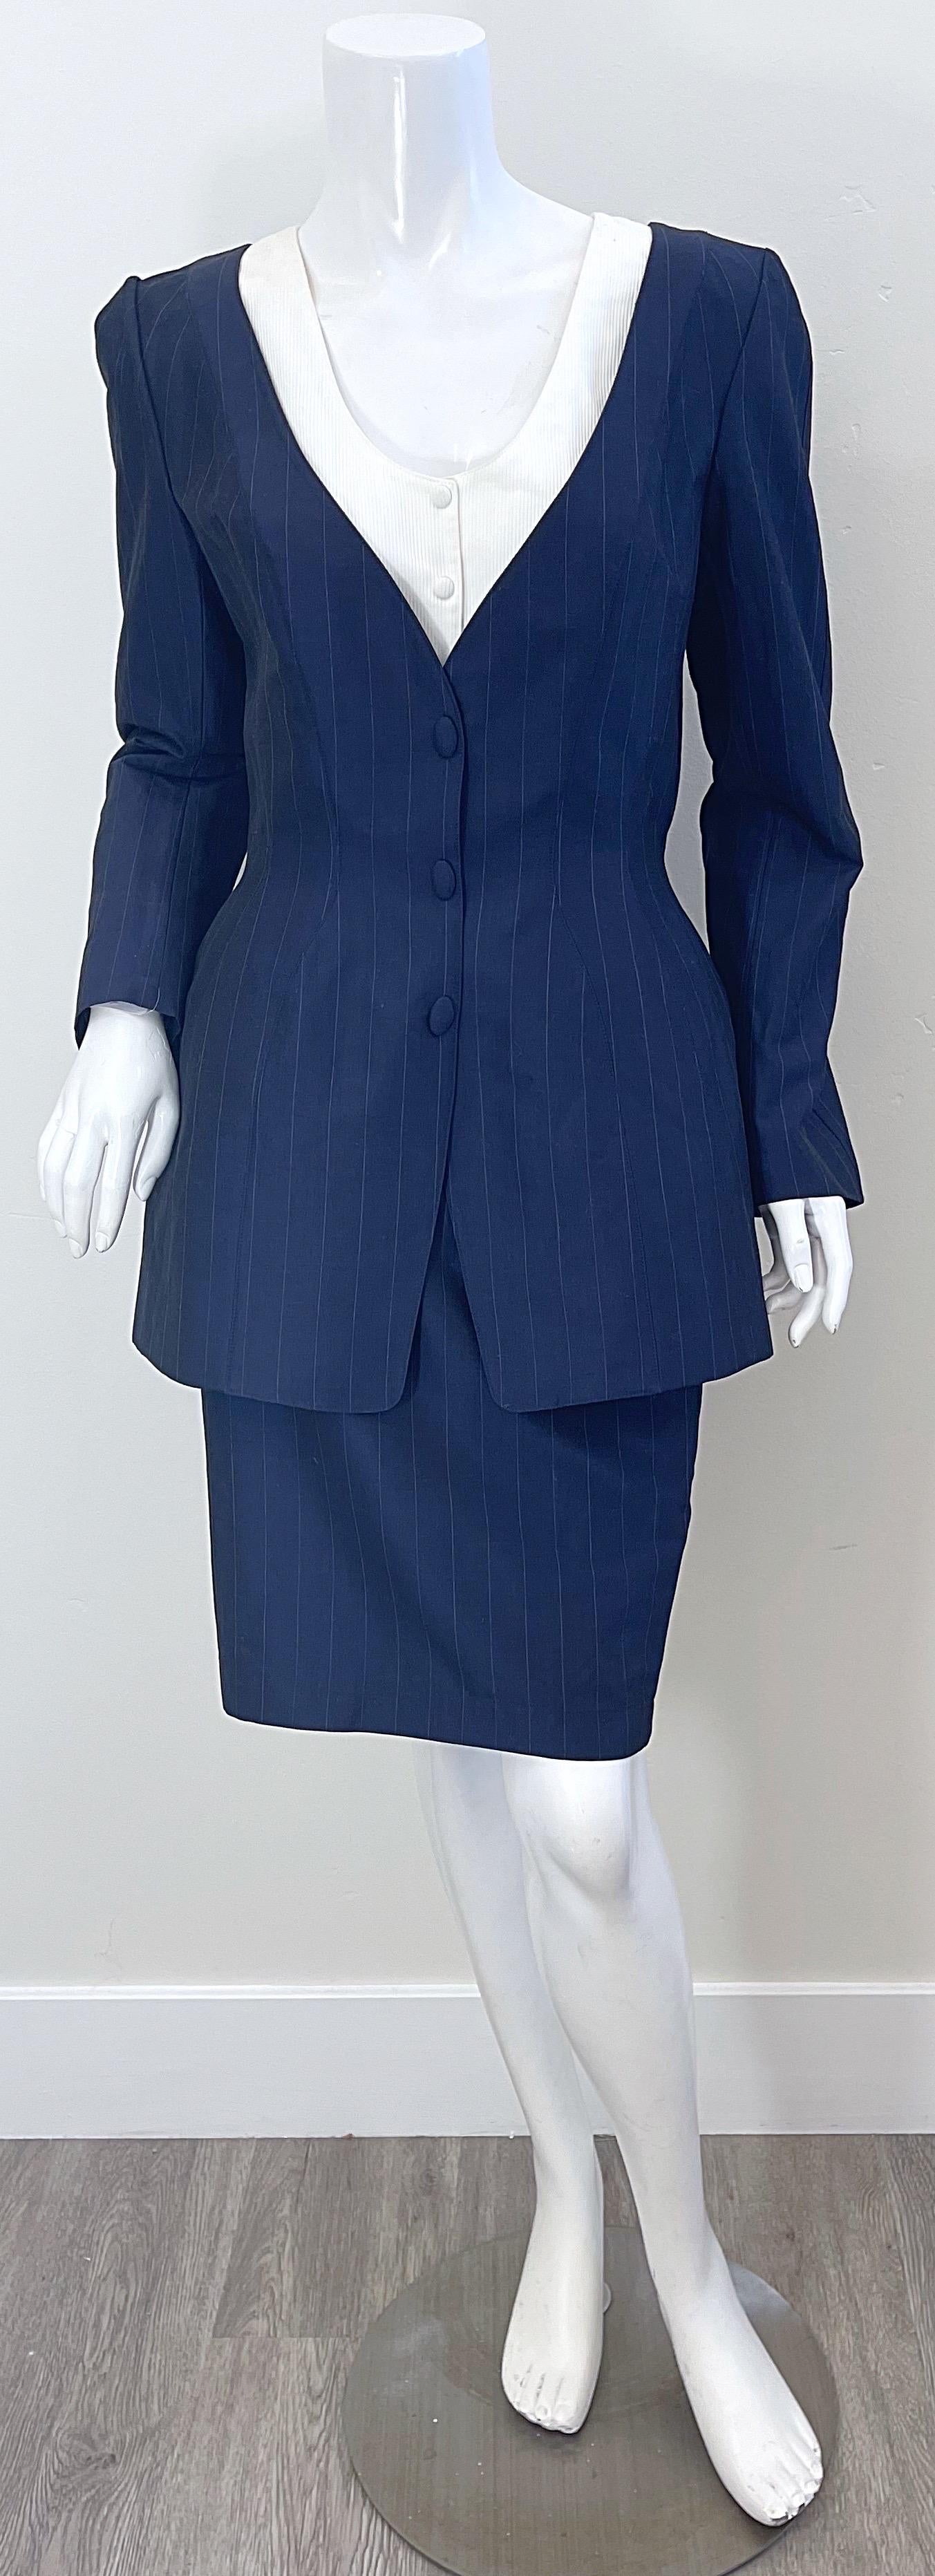 NWT 1990s Thierry Mugler Navy Blue Pinstripe Size 4 Vintage 90s Skirt Suit For Sale 5